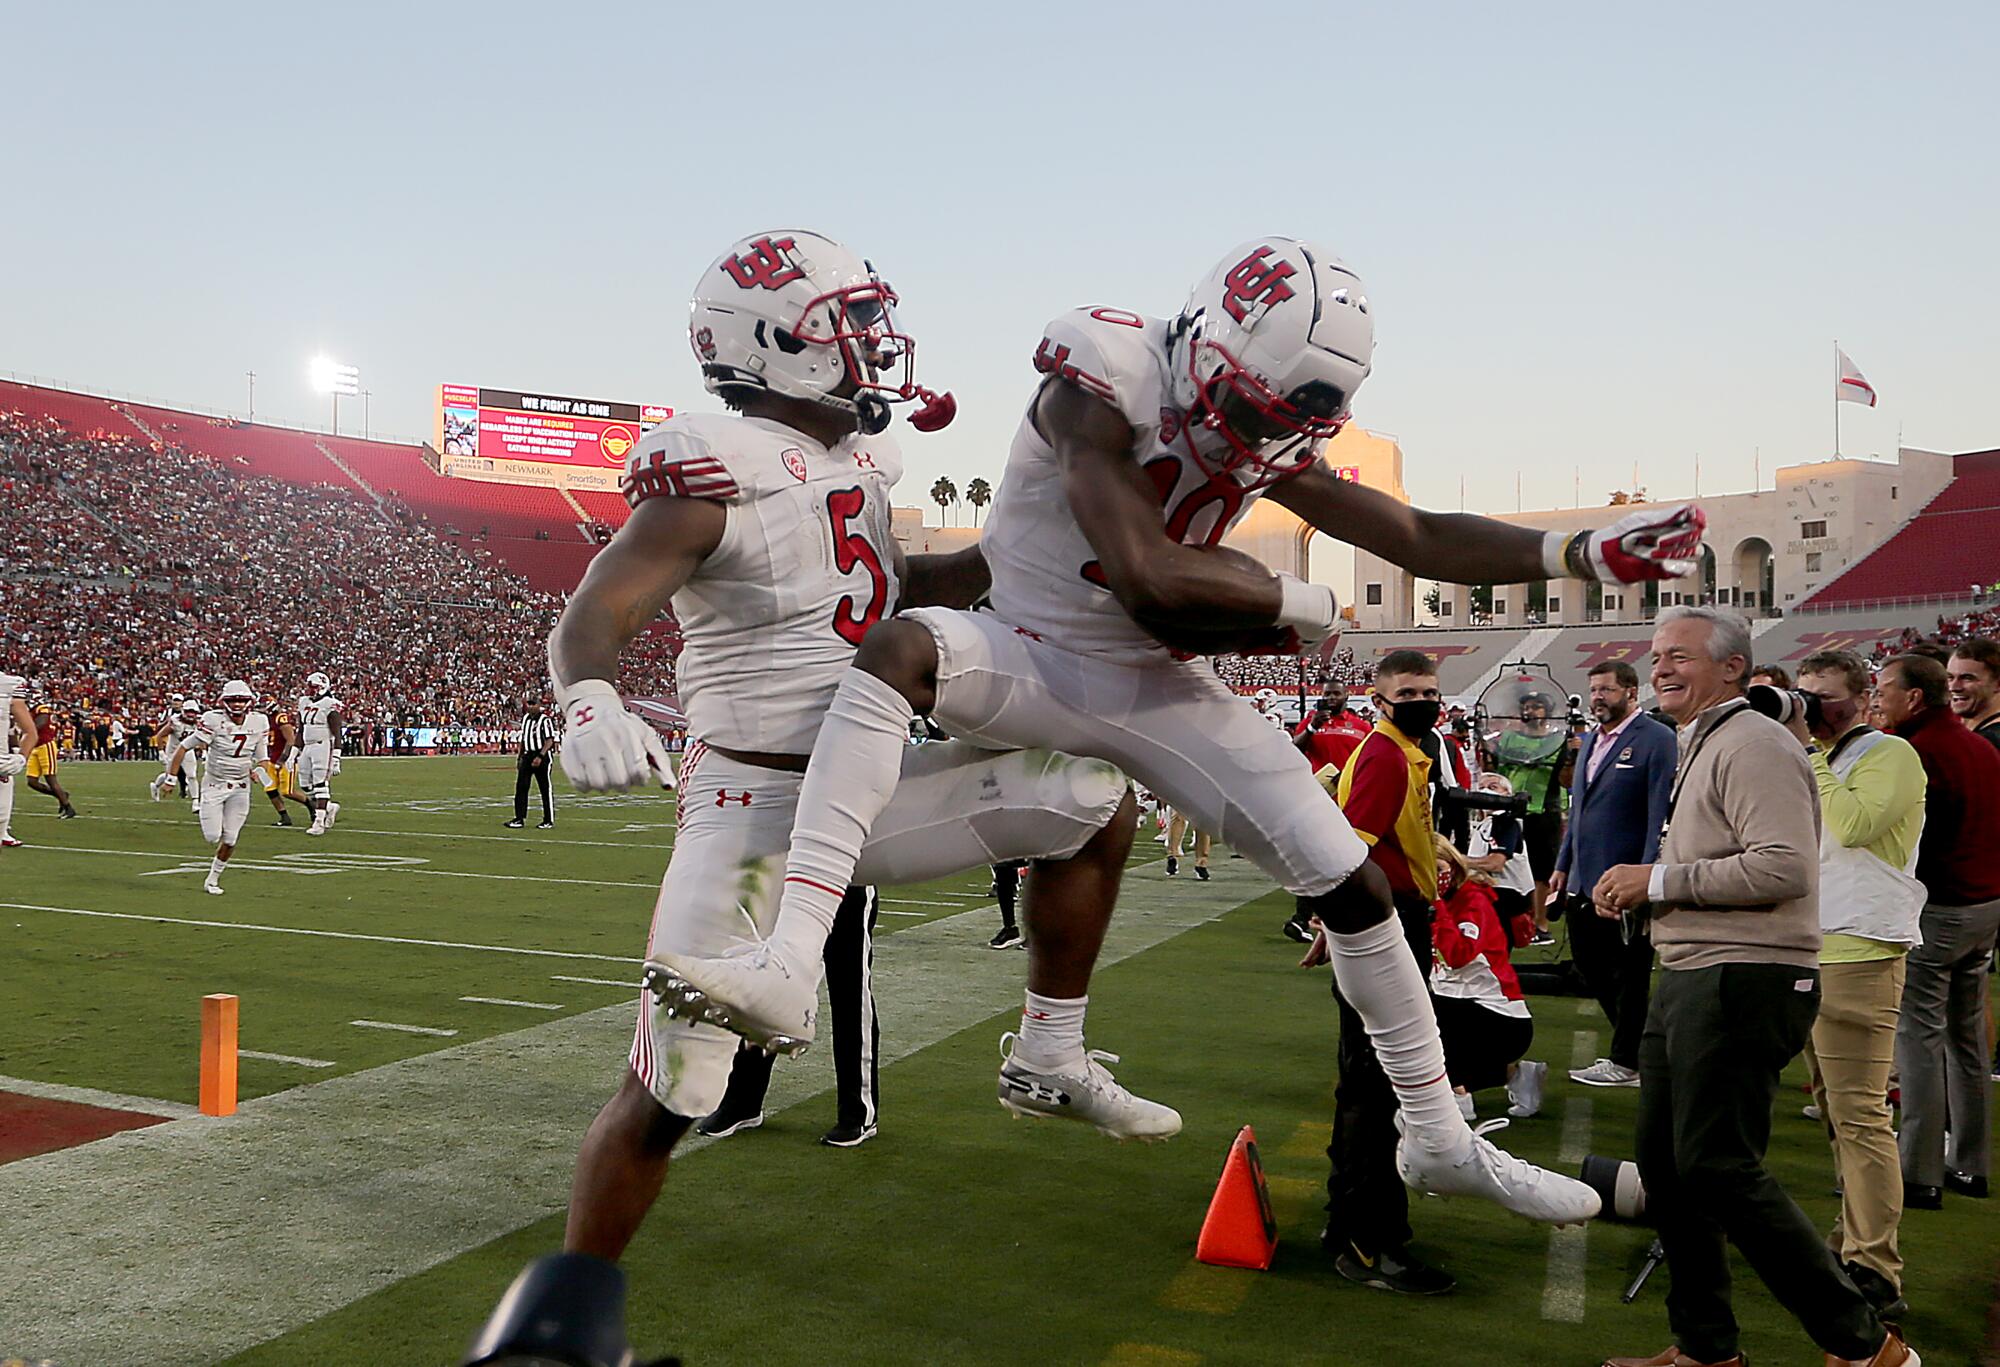 Utah receiver Money Parks celebrates after scoring a touchdown against USC in the first half.